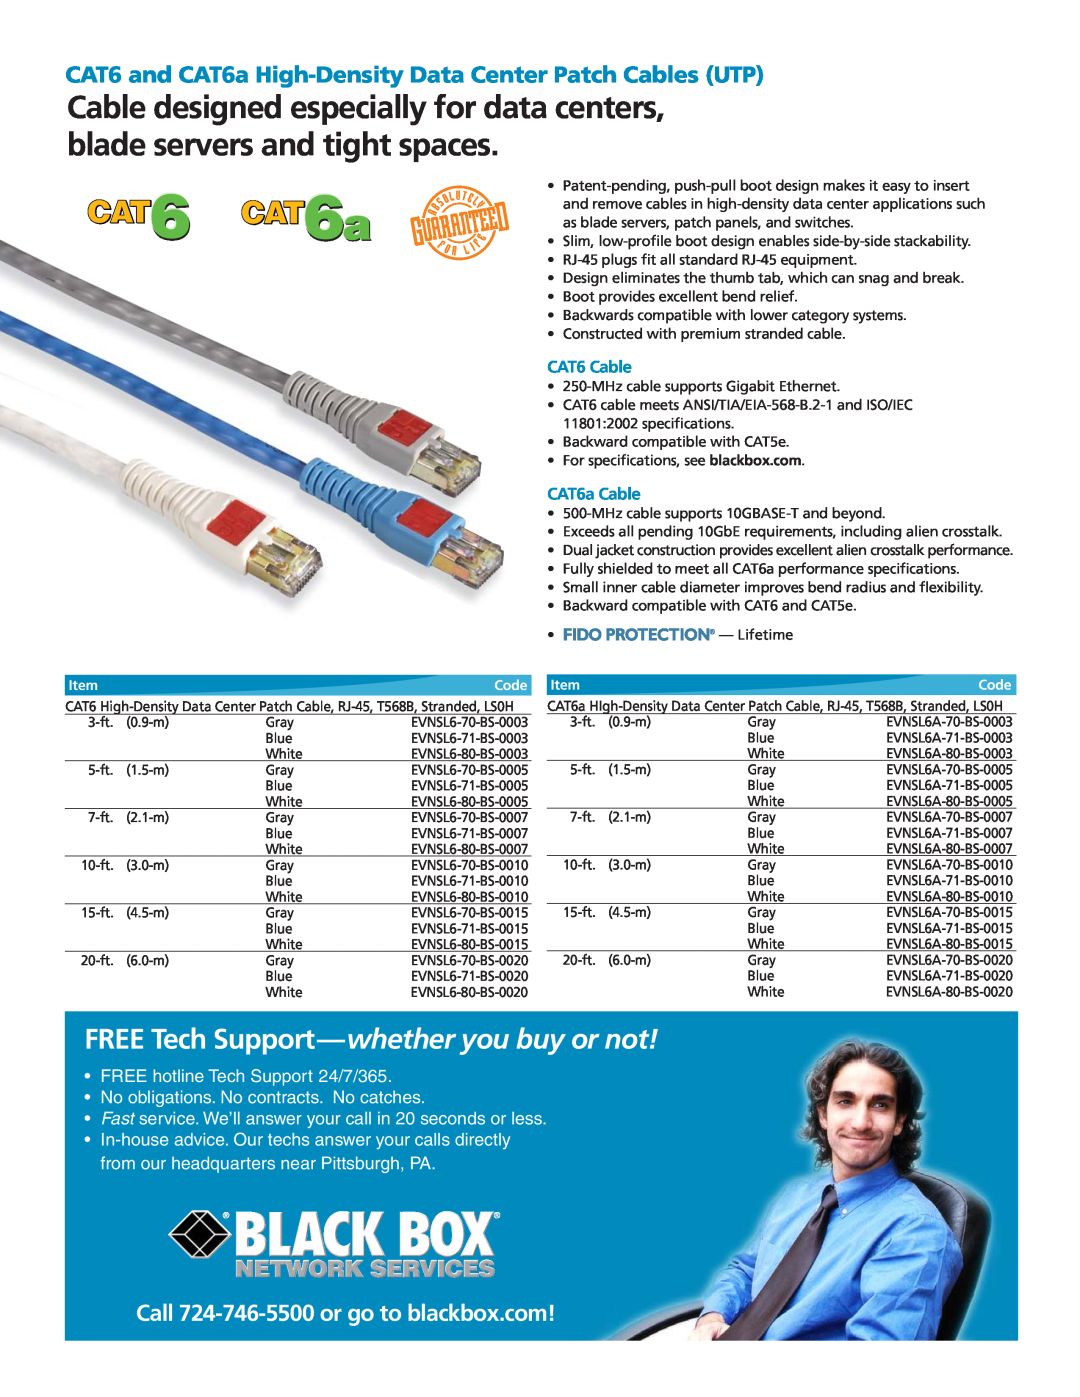 Black Box Call 724-746-5500or go to blackbox.com, FREE Tech Support-whetheryou buy or not, CAT6 Cable, CAT6a Cable 